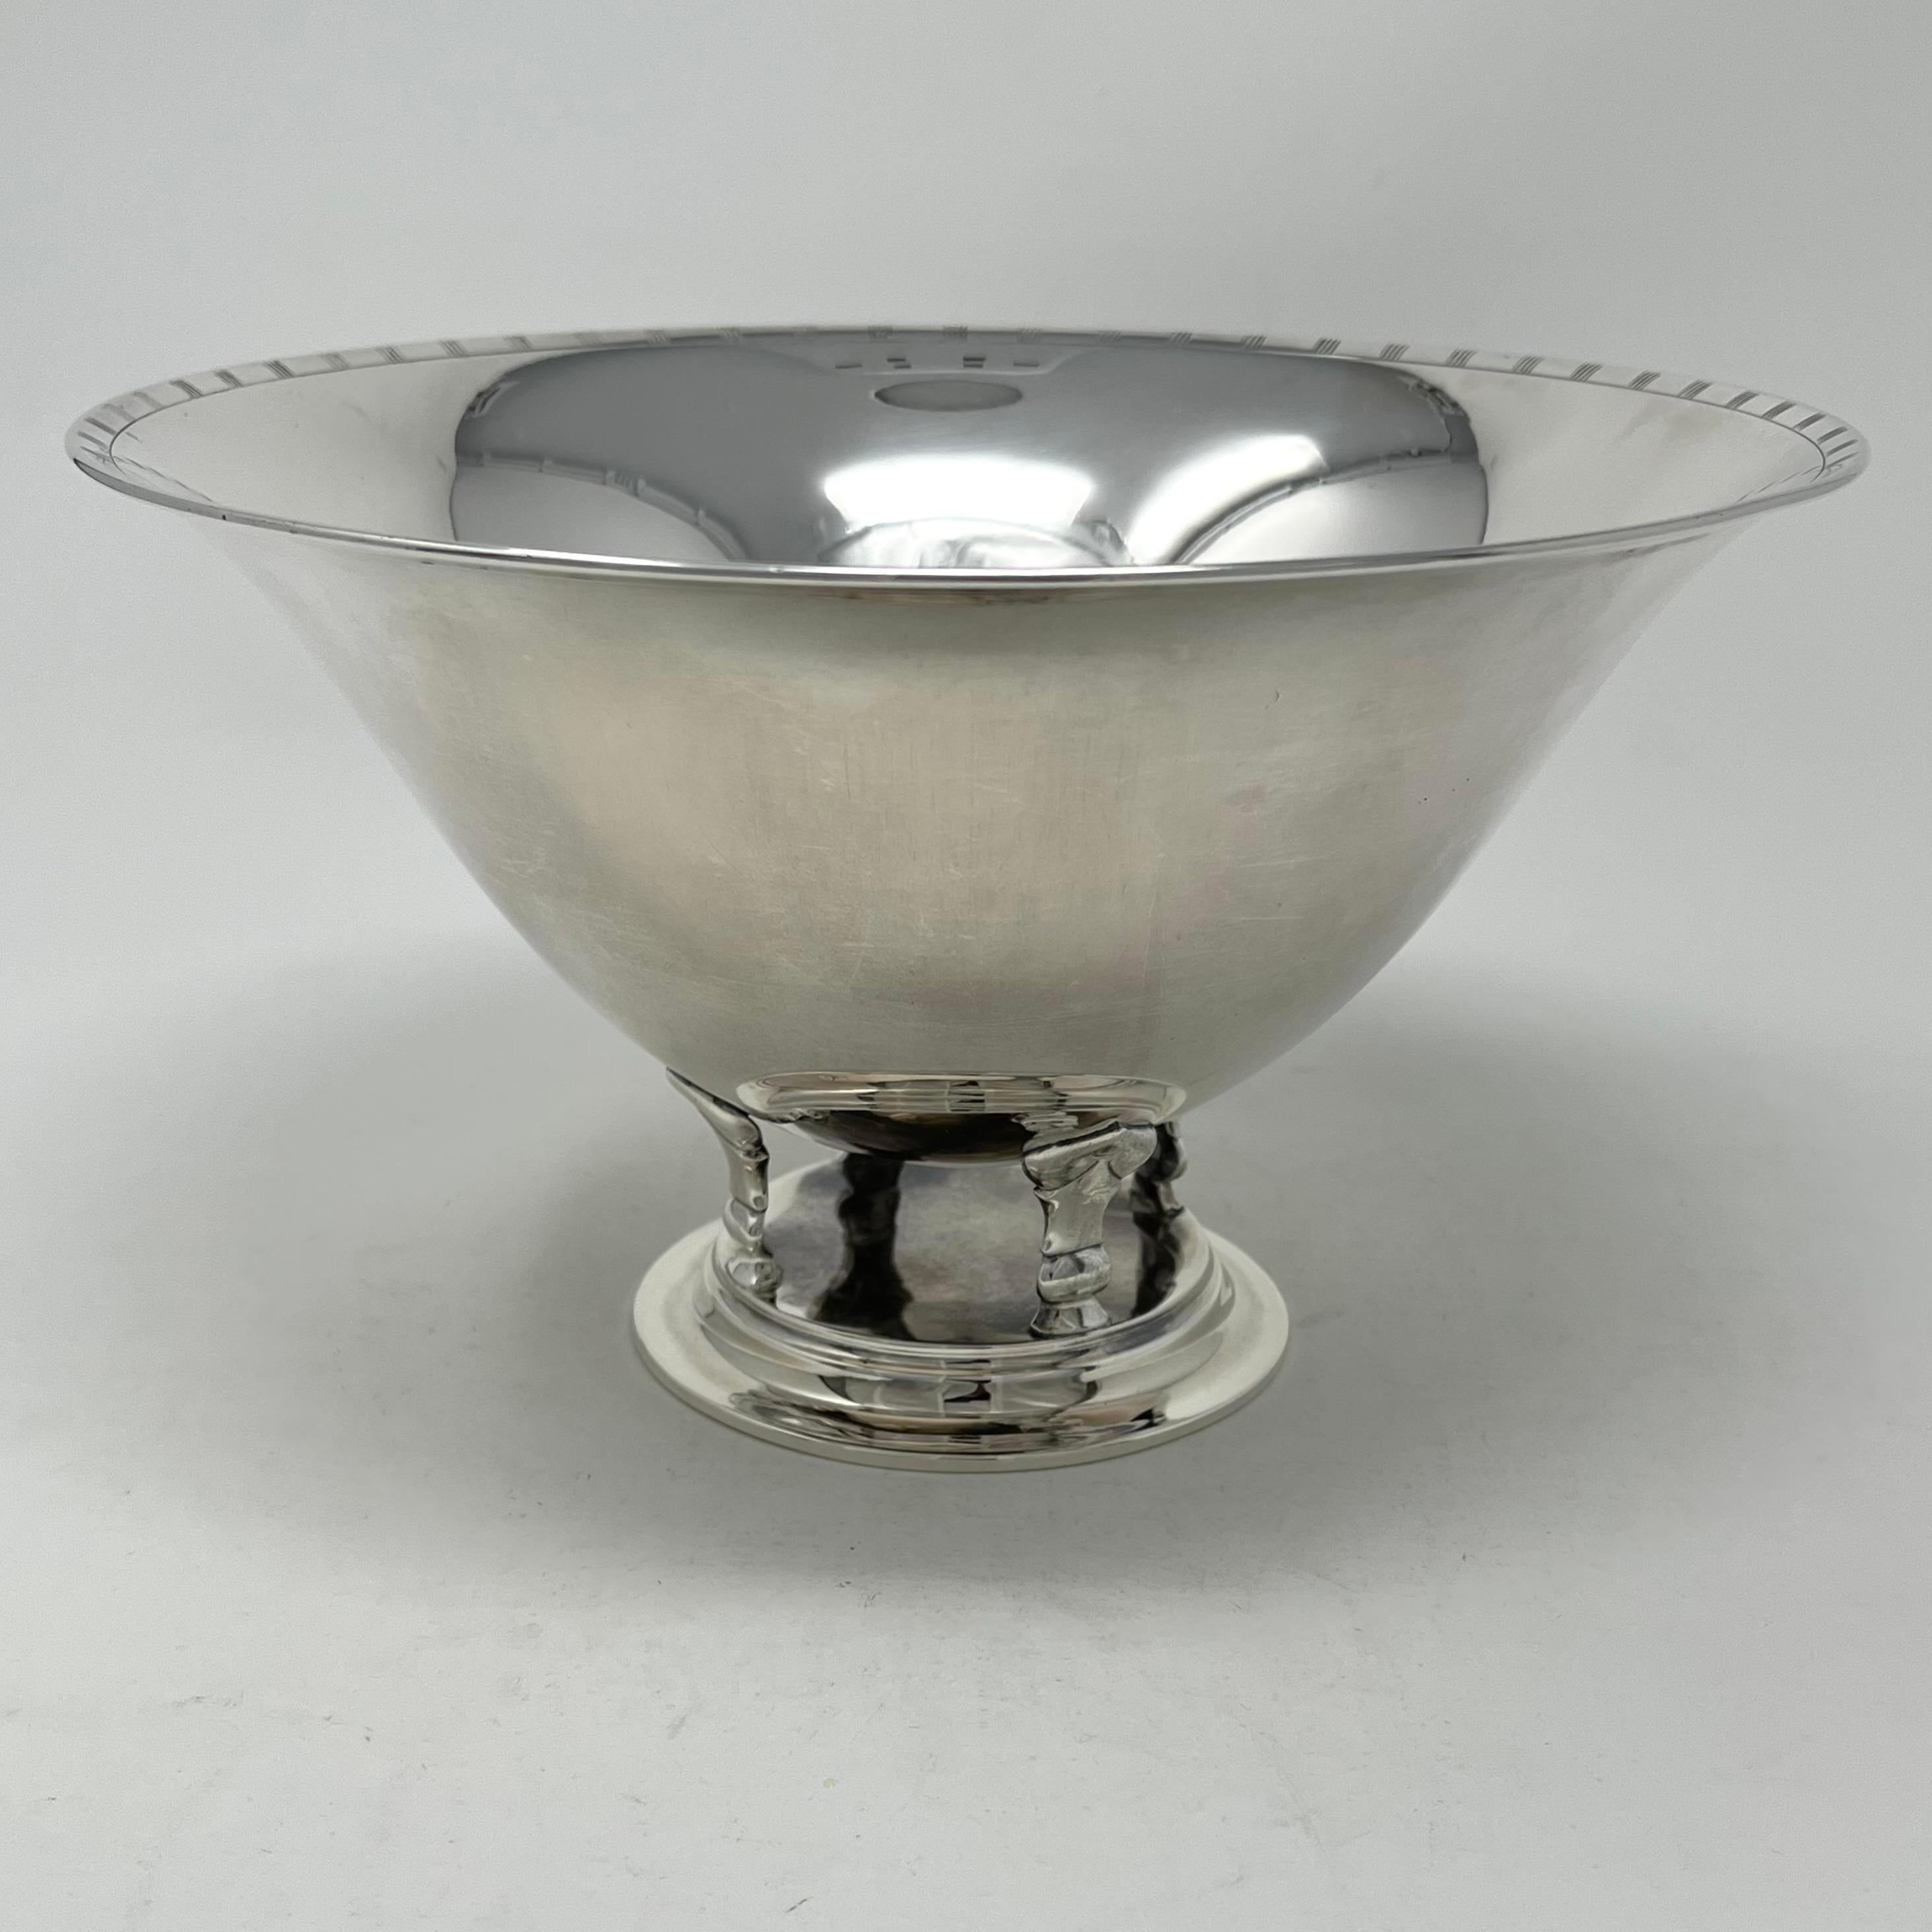 Just Andersen Art-Deco footed bowl with decorated rim. It is simply designed on an integral pedestal base and supported by four stylized pillars. It was designed and made by one of the leading designers in metal ware during the period. While bronze,